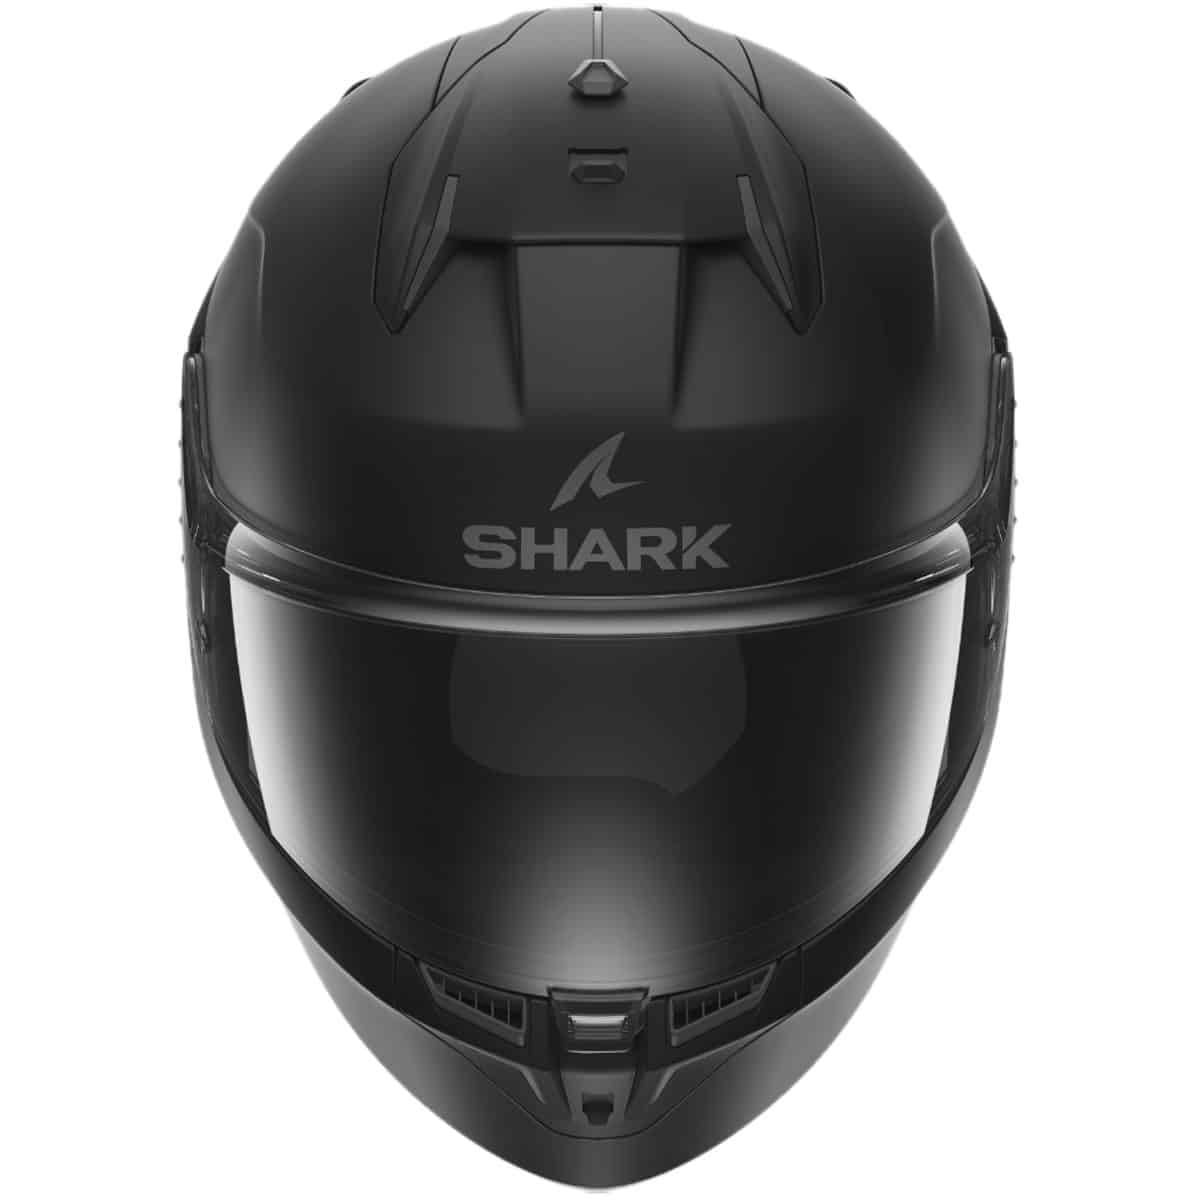 Shark Helmets' D-Skwal 3. This ultra-modern helmet combines an aggressive look with exceptional features like advanced aerodynamics and "BEST FIT" technology for optimal comfort and stability at any speed - back